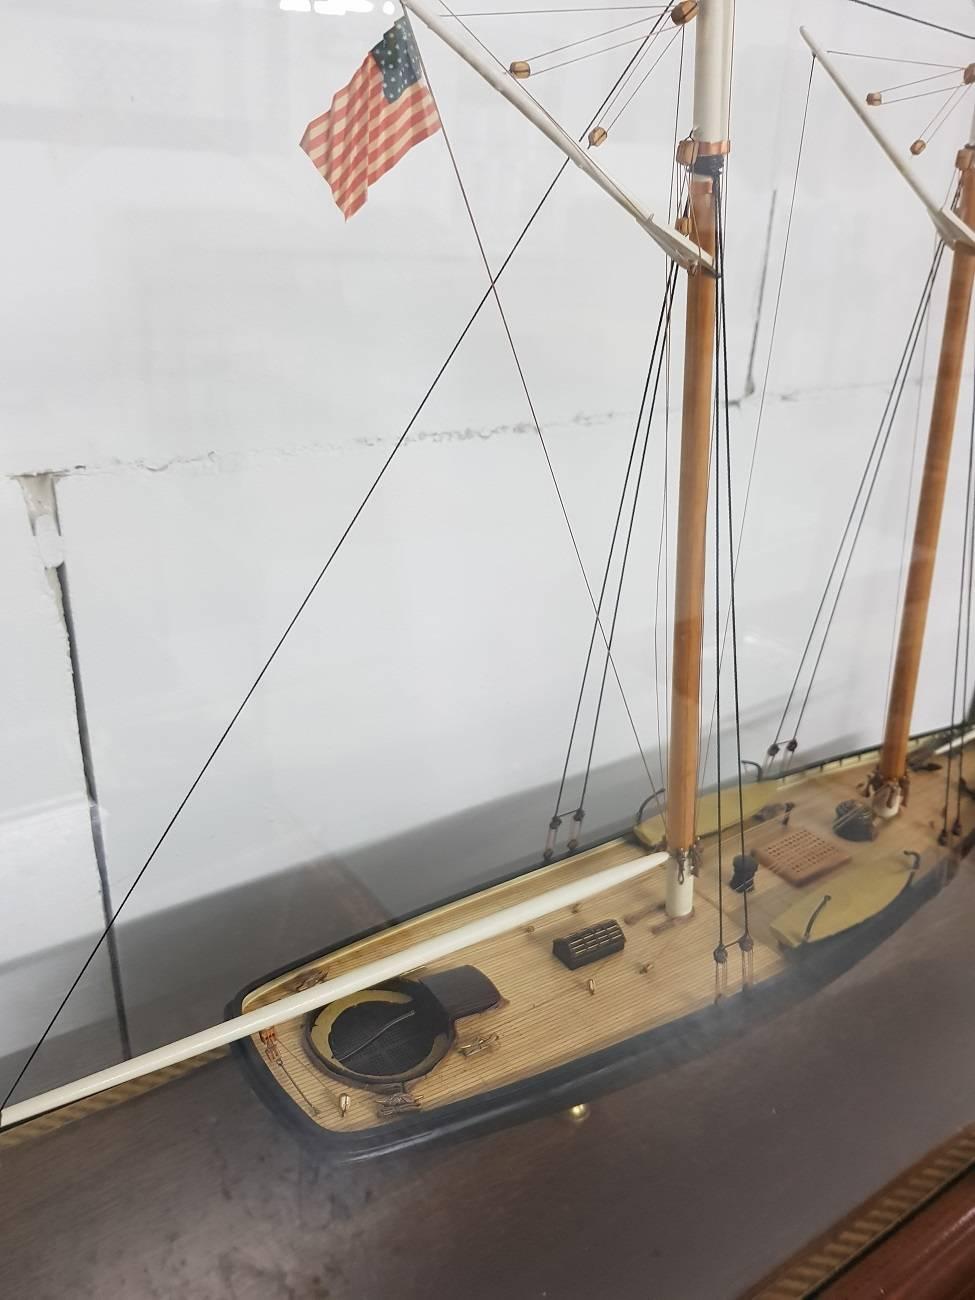 america's cup 1851